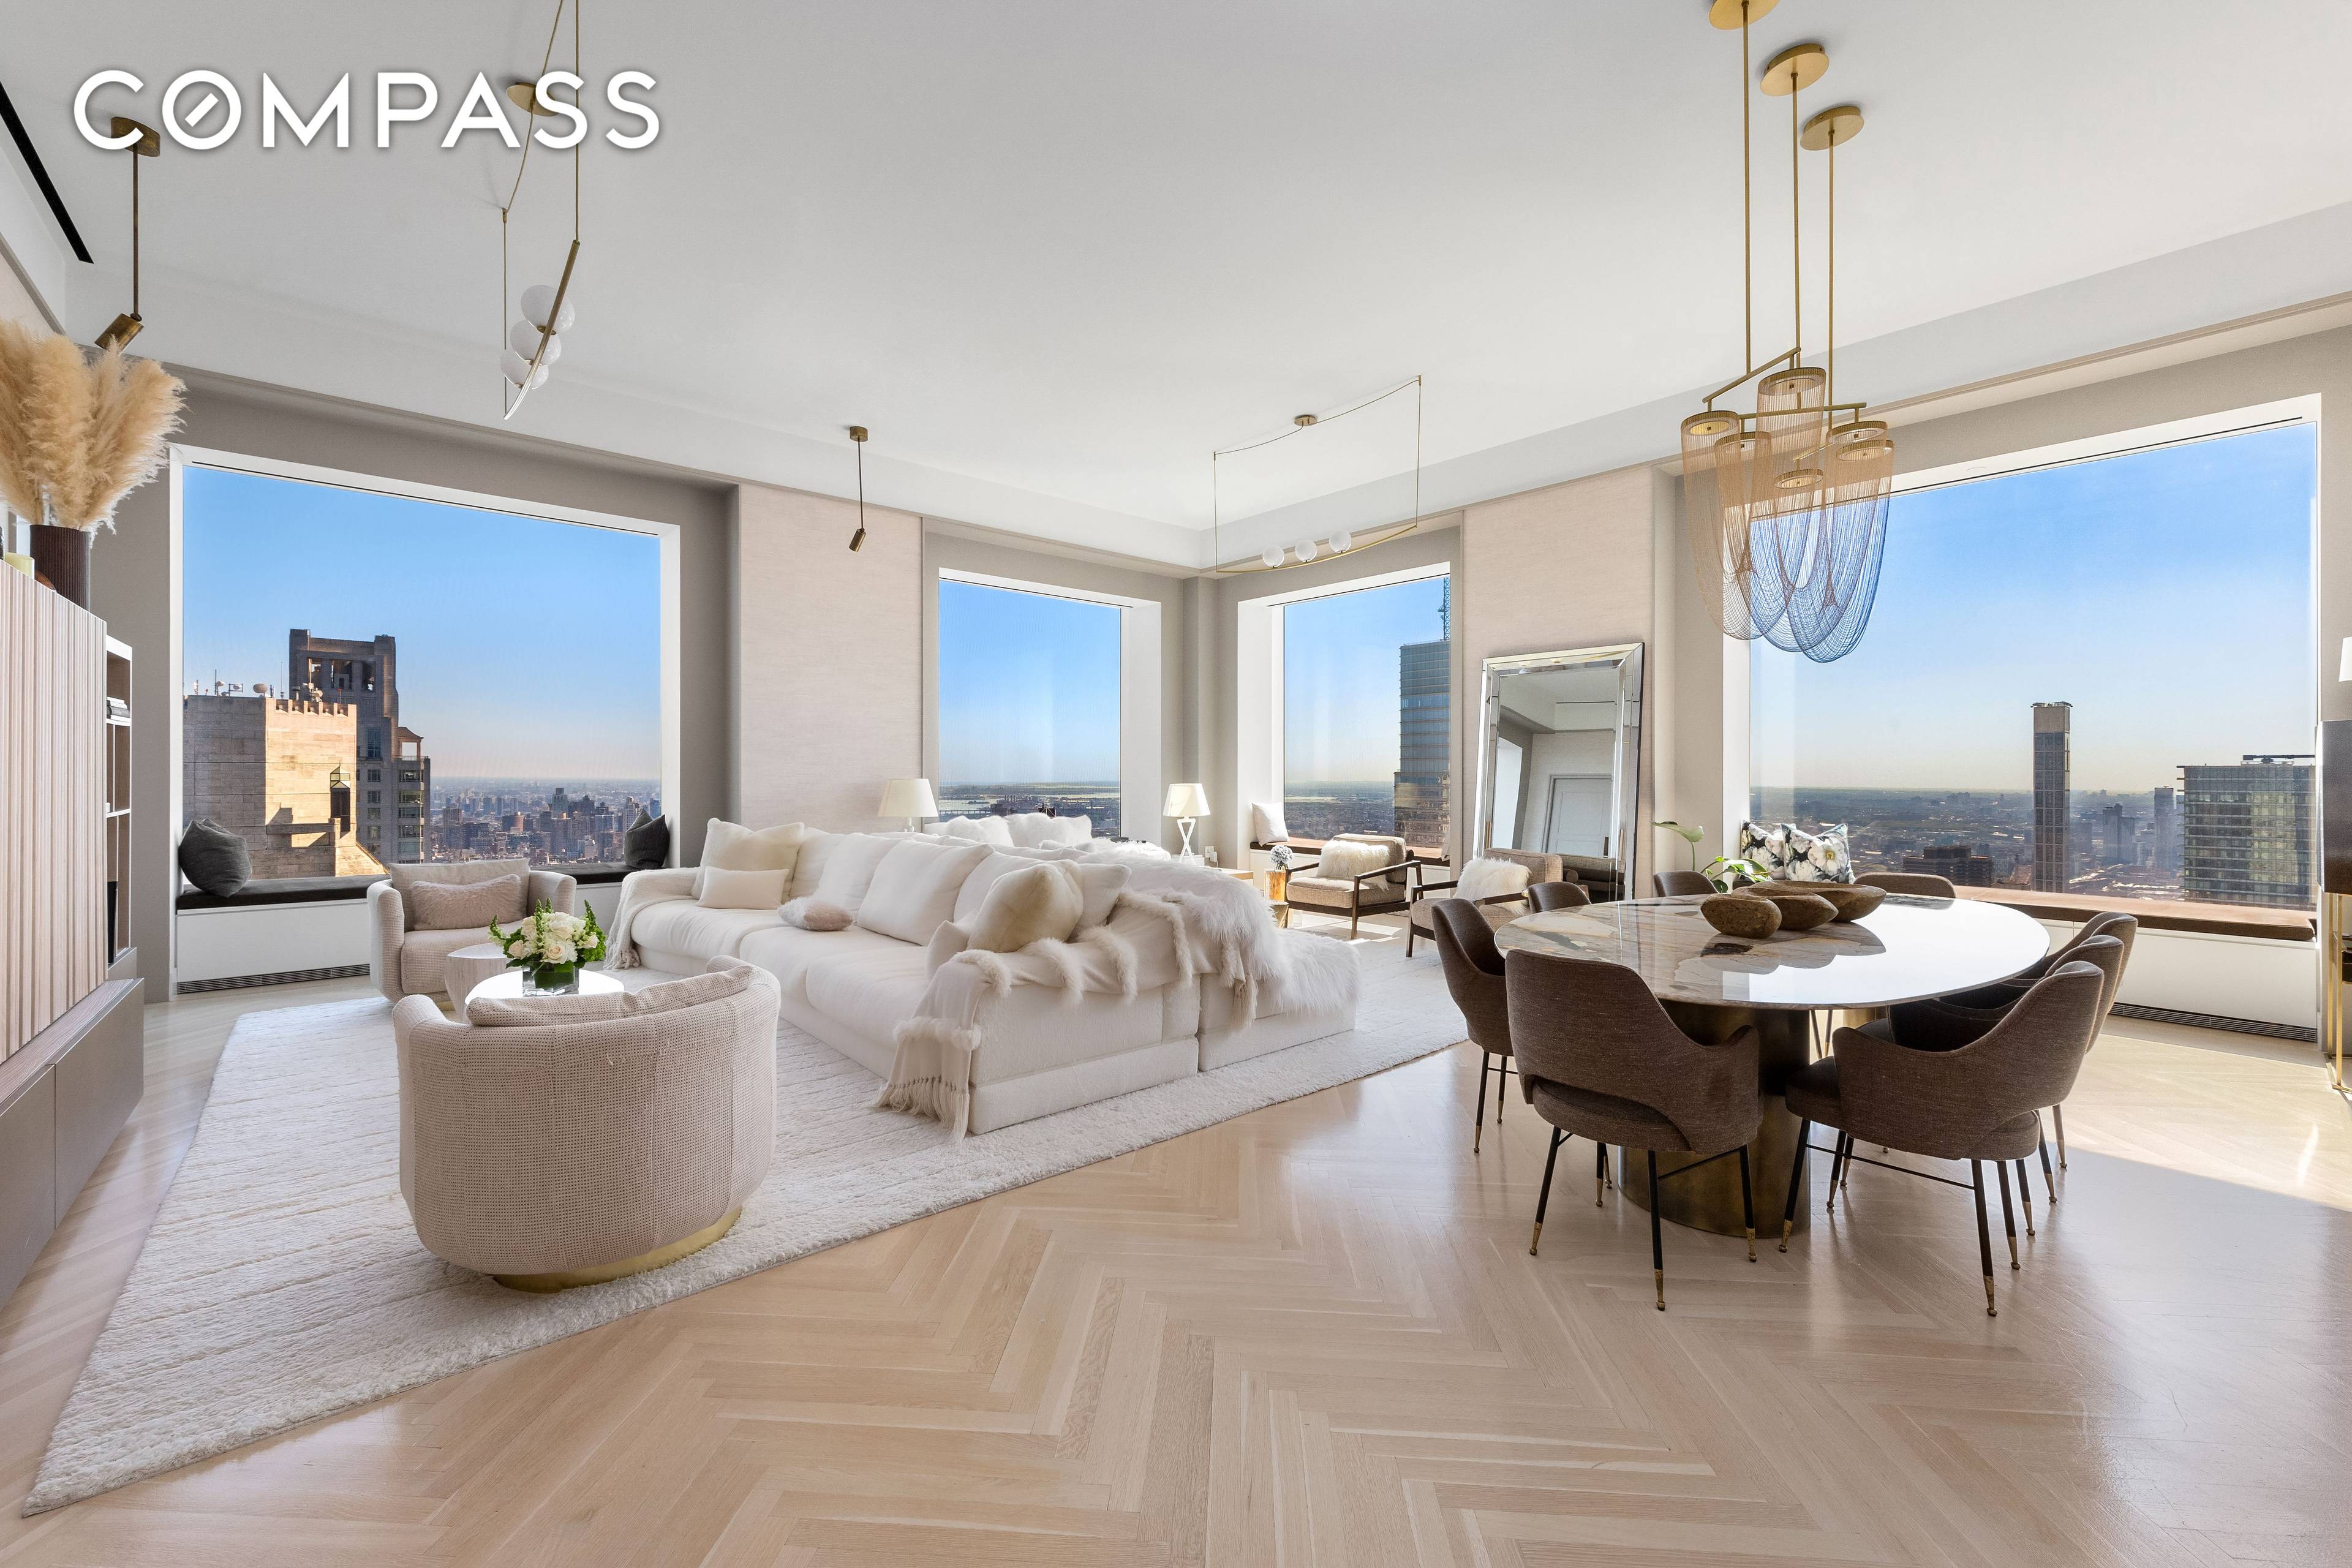 Finally, a true 4 bedroom plus library has come to the market at 432 Park Avenue.